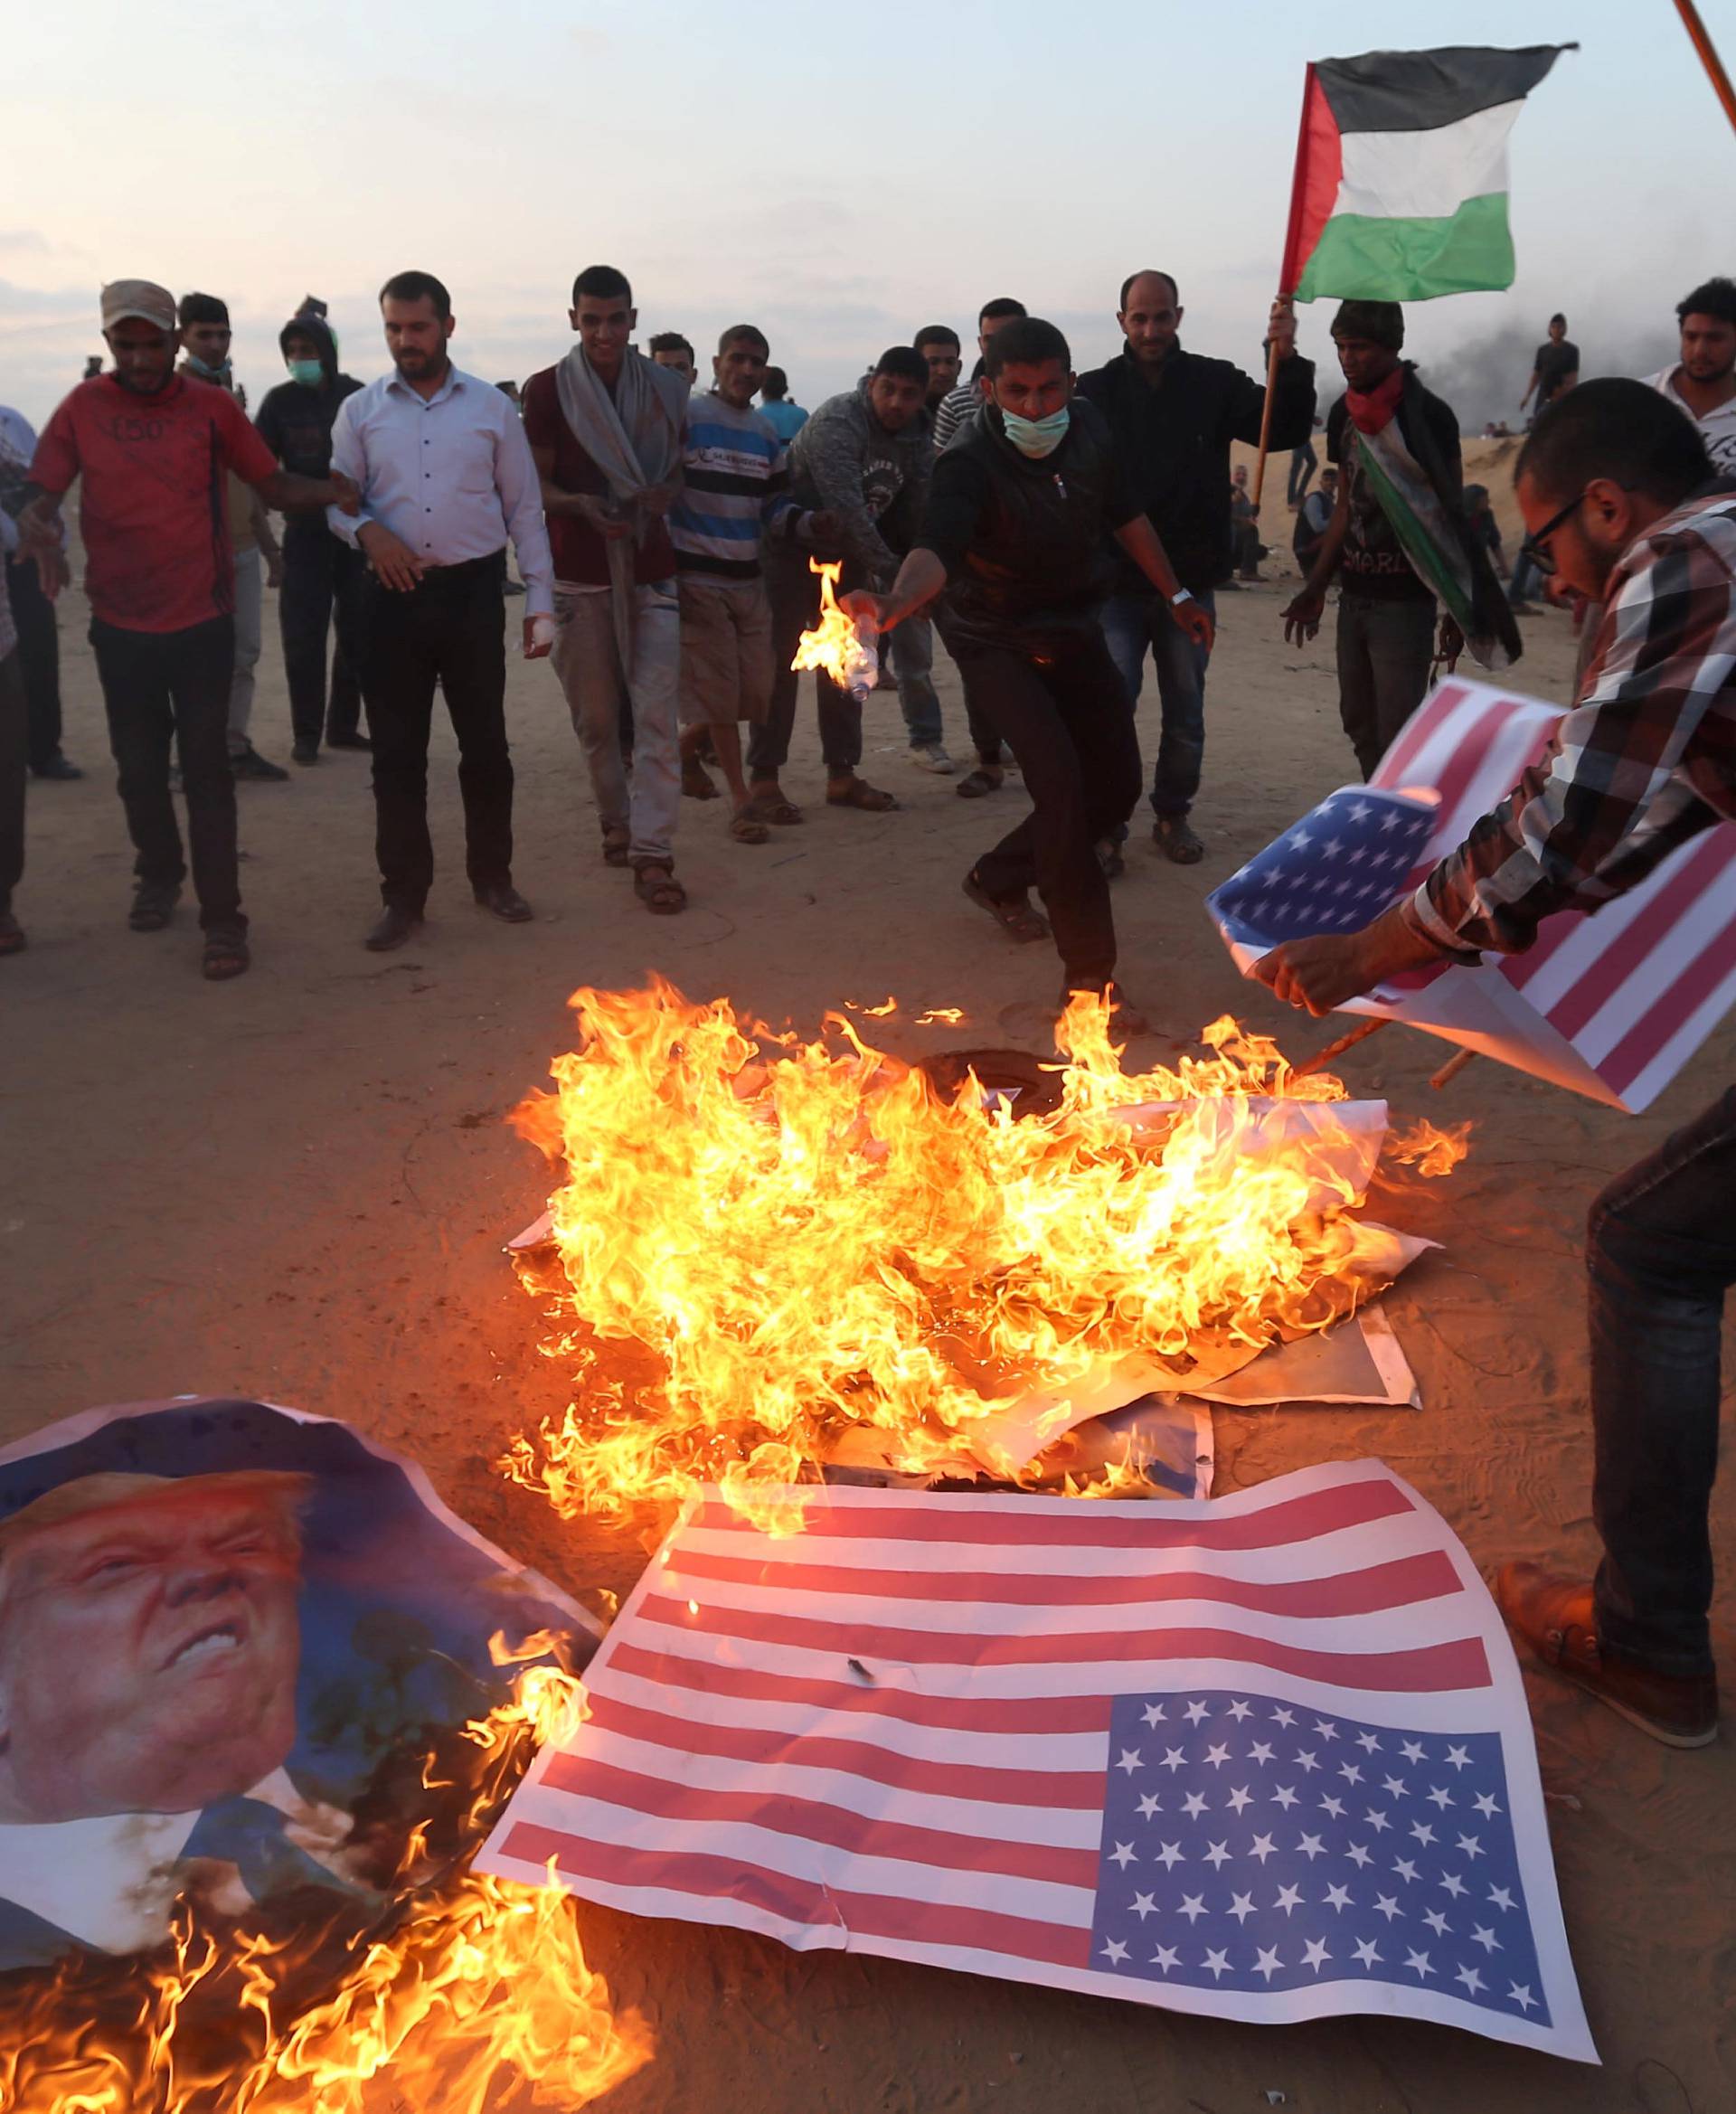 Palestinian demonstrators burn representations of U.S. flags and a poster of U.S. President Trump during a protest, at the Israel-Gaza border in the southern Gaza Strip